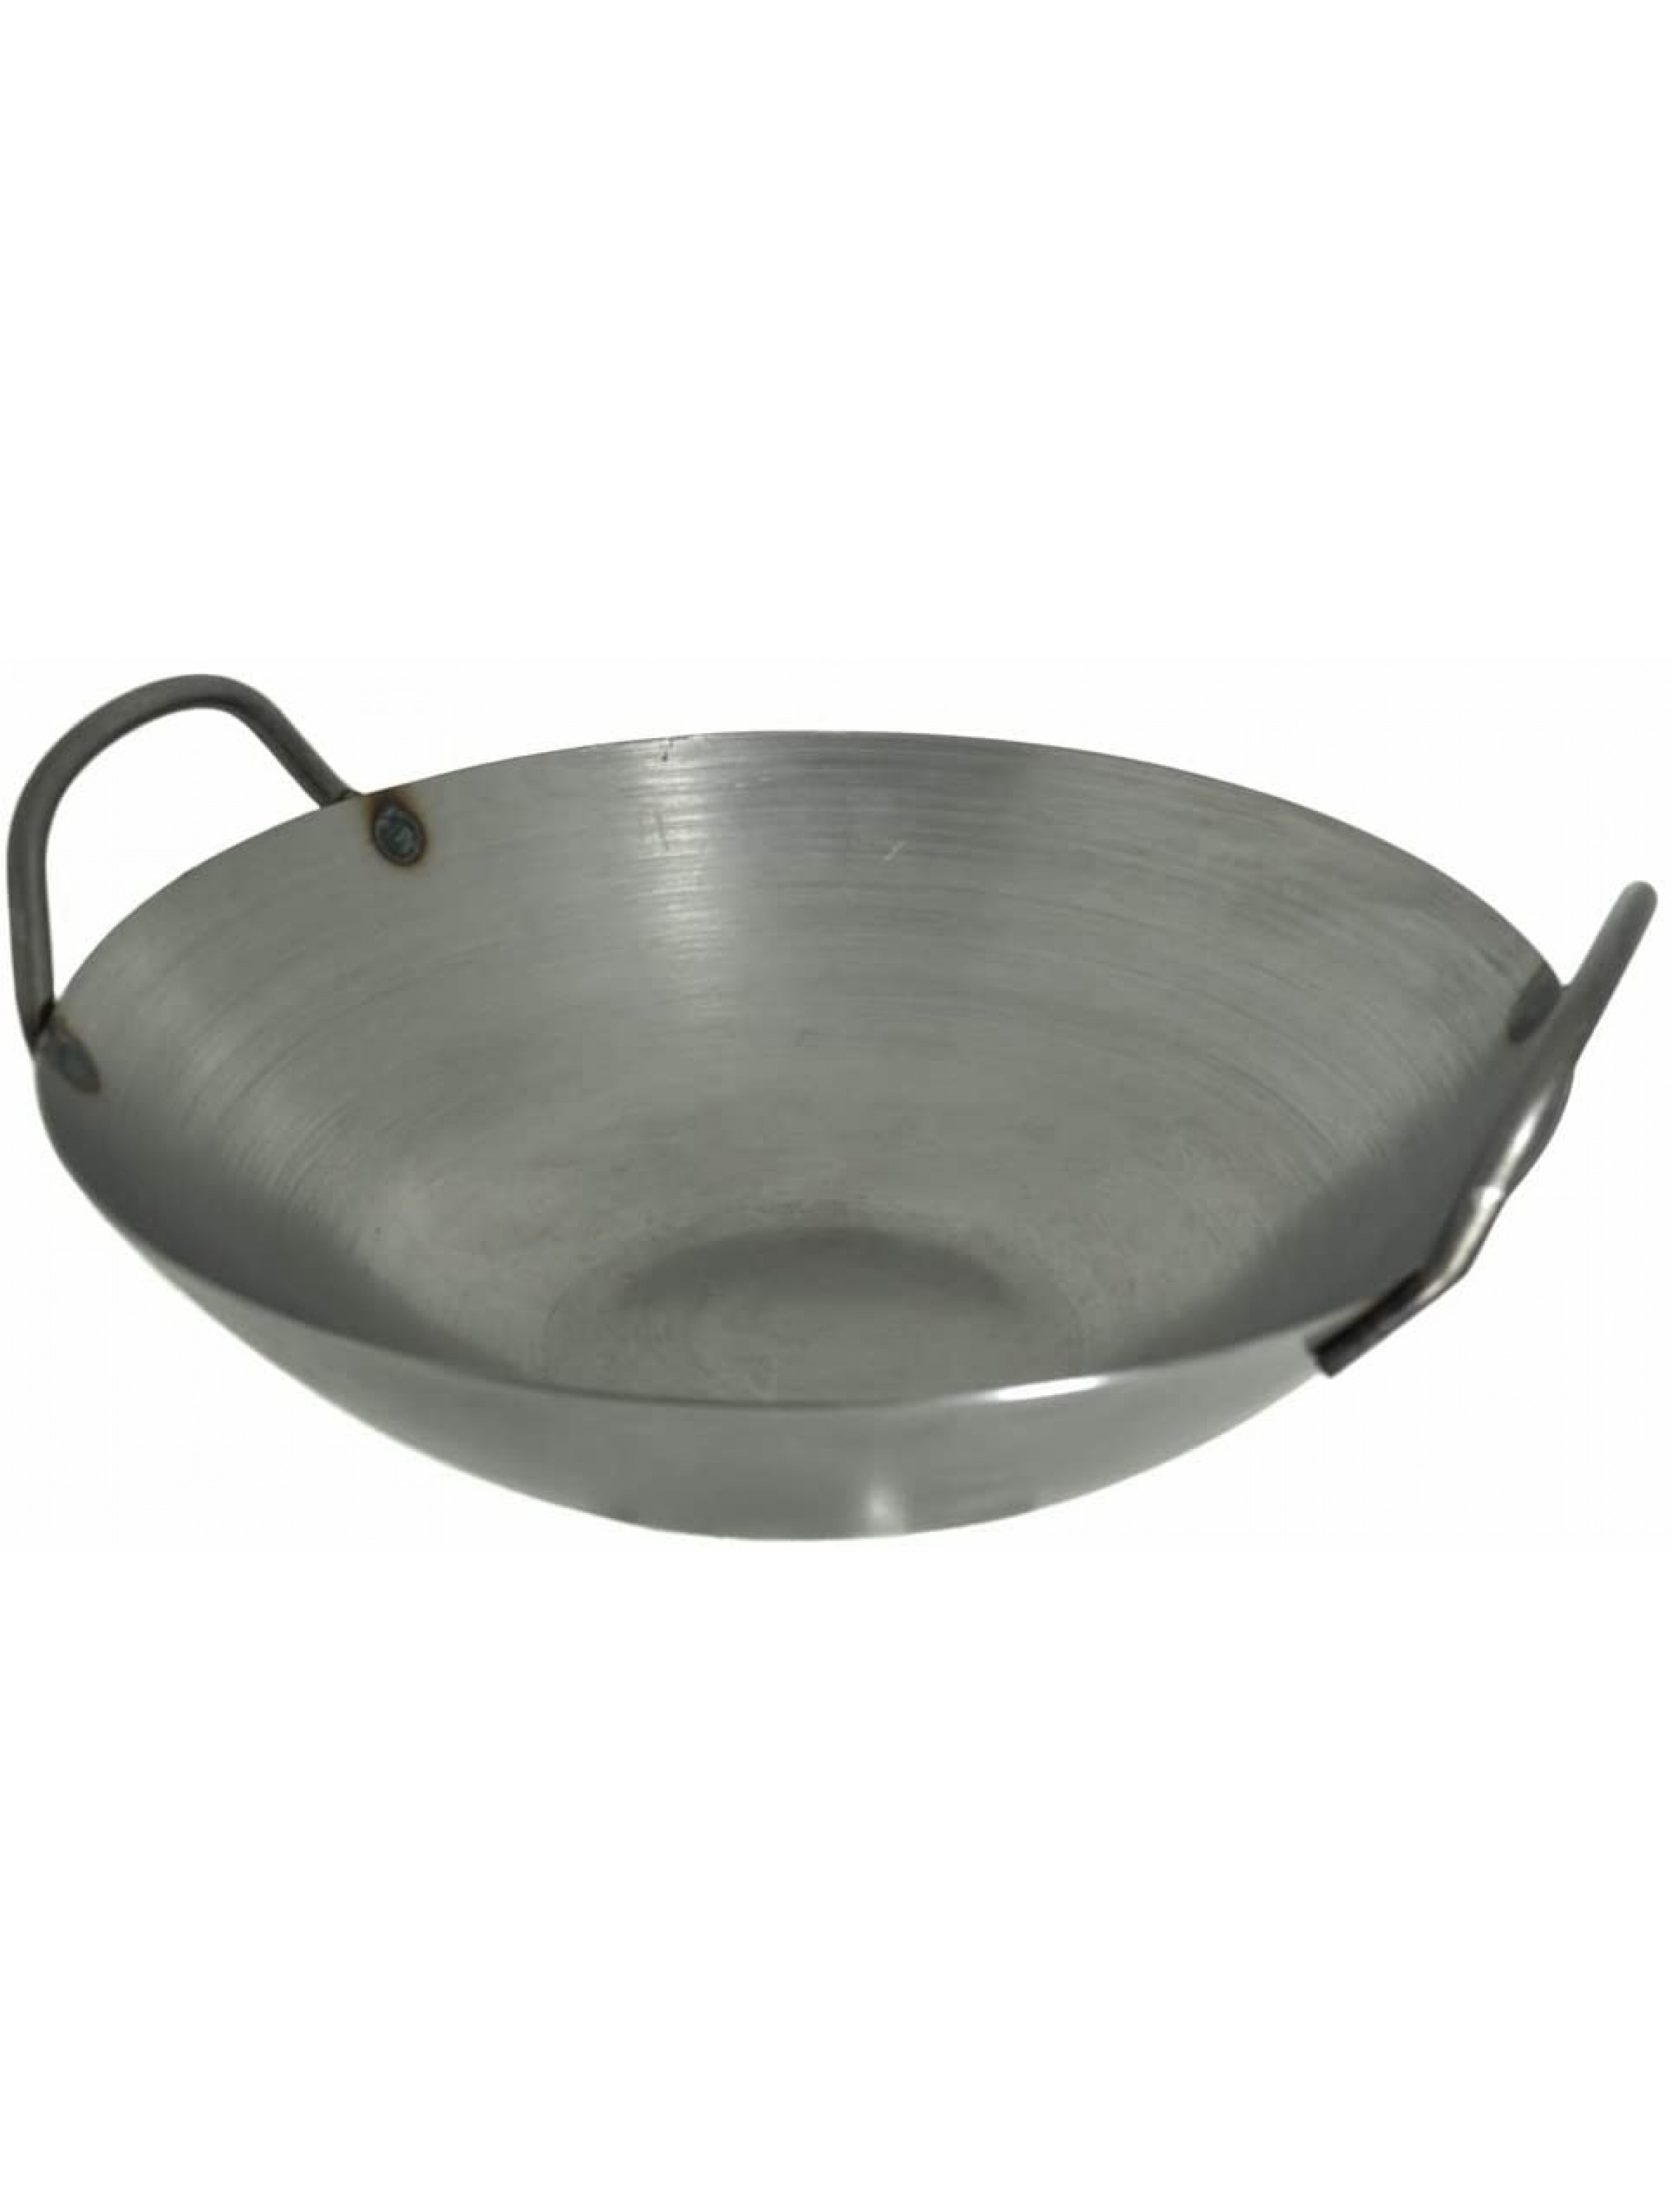 12 Inches Carbon Steel Flat Bottom Wok with Two Side Handle 14 Gauge Thickness USA Made - BK2EVHVZG